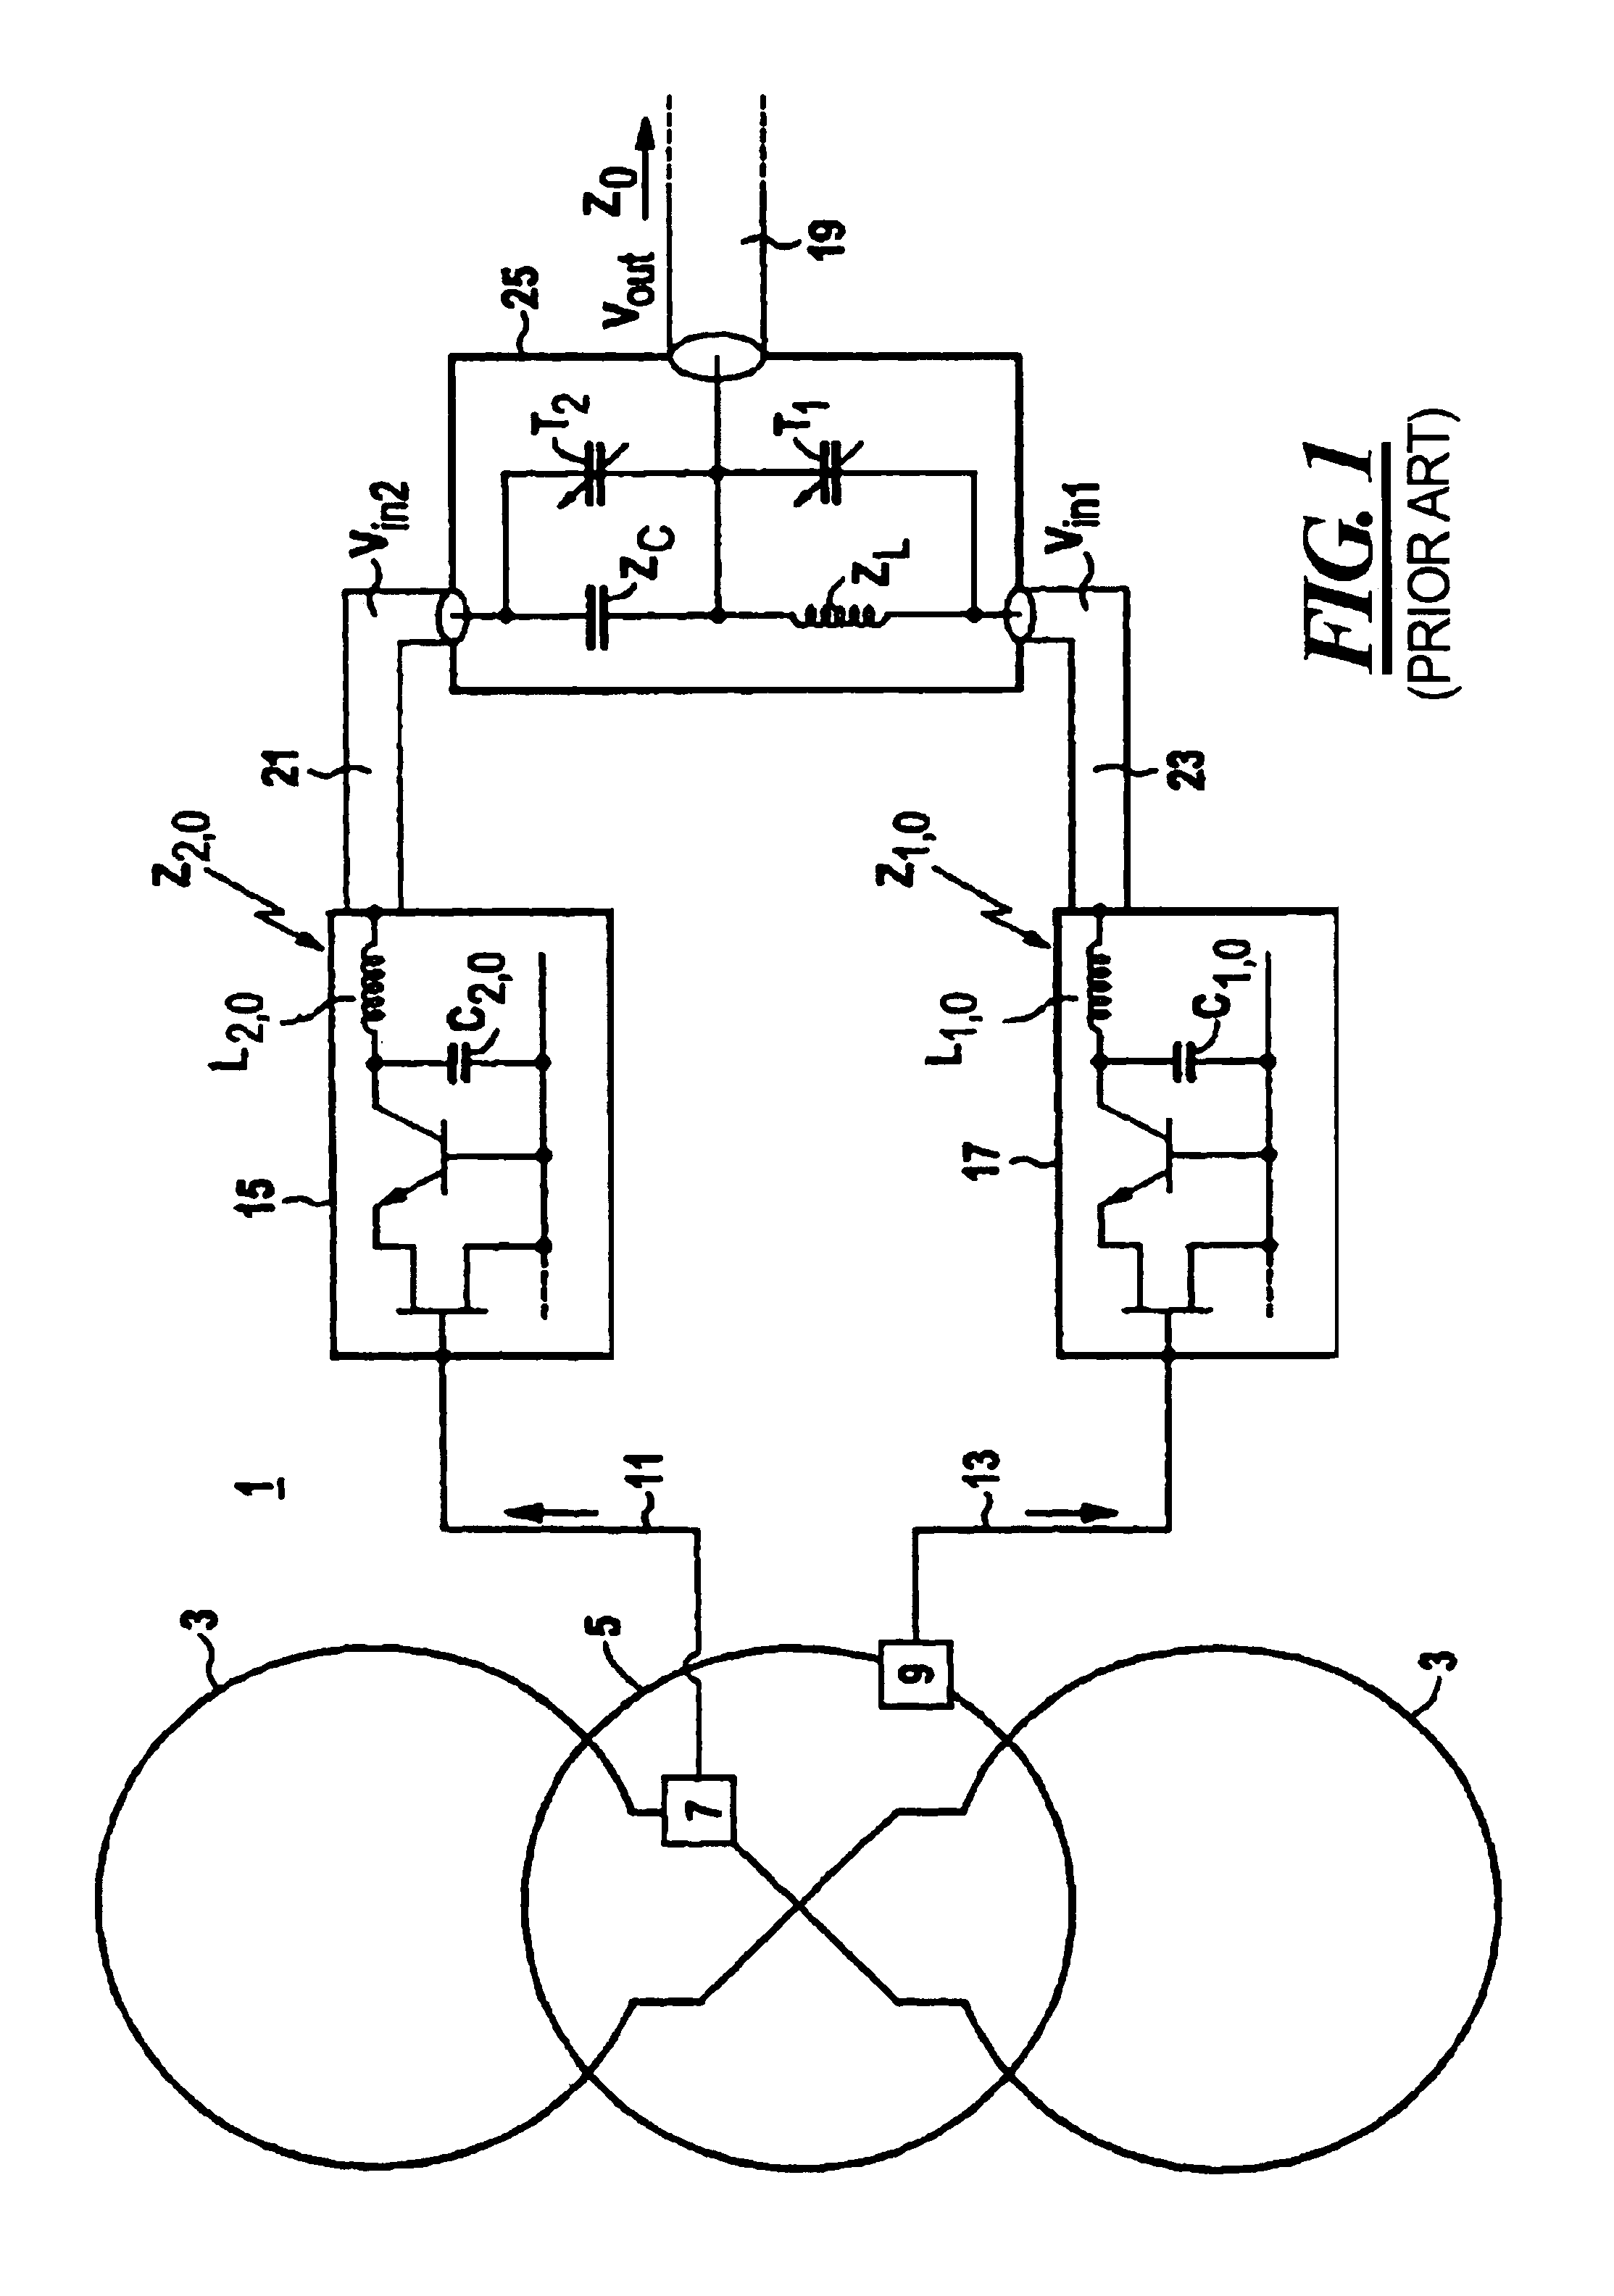 Reception device for a magnetic resonance tomography installation, having a phase shift-compensating amplifier